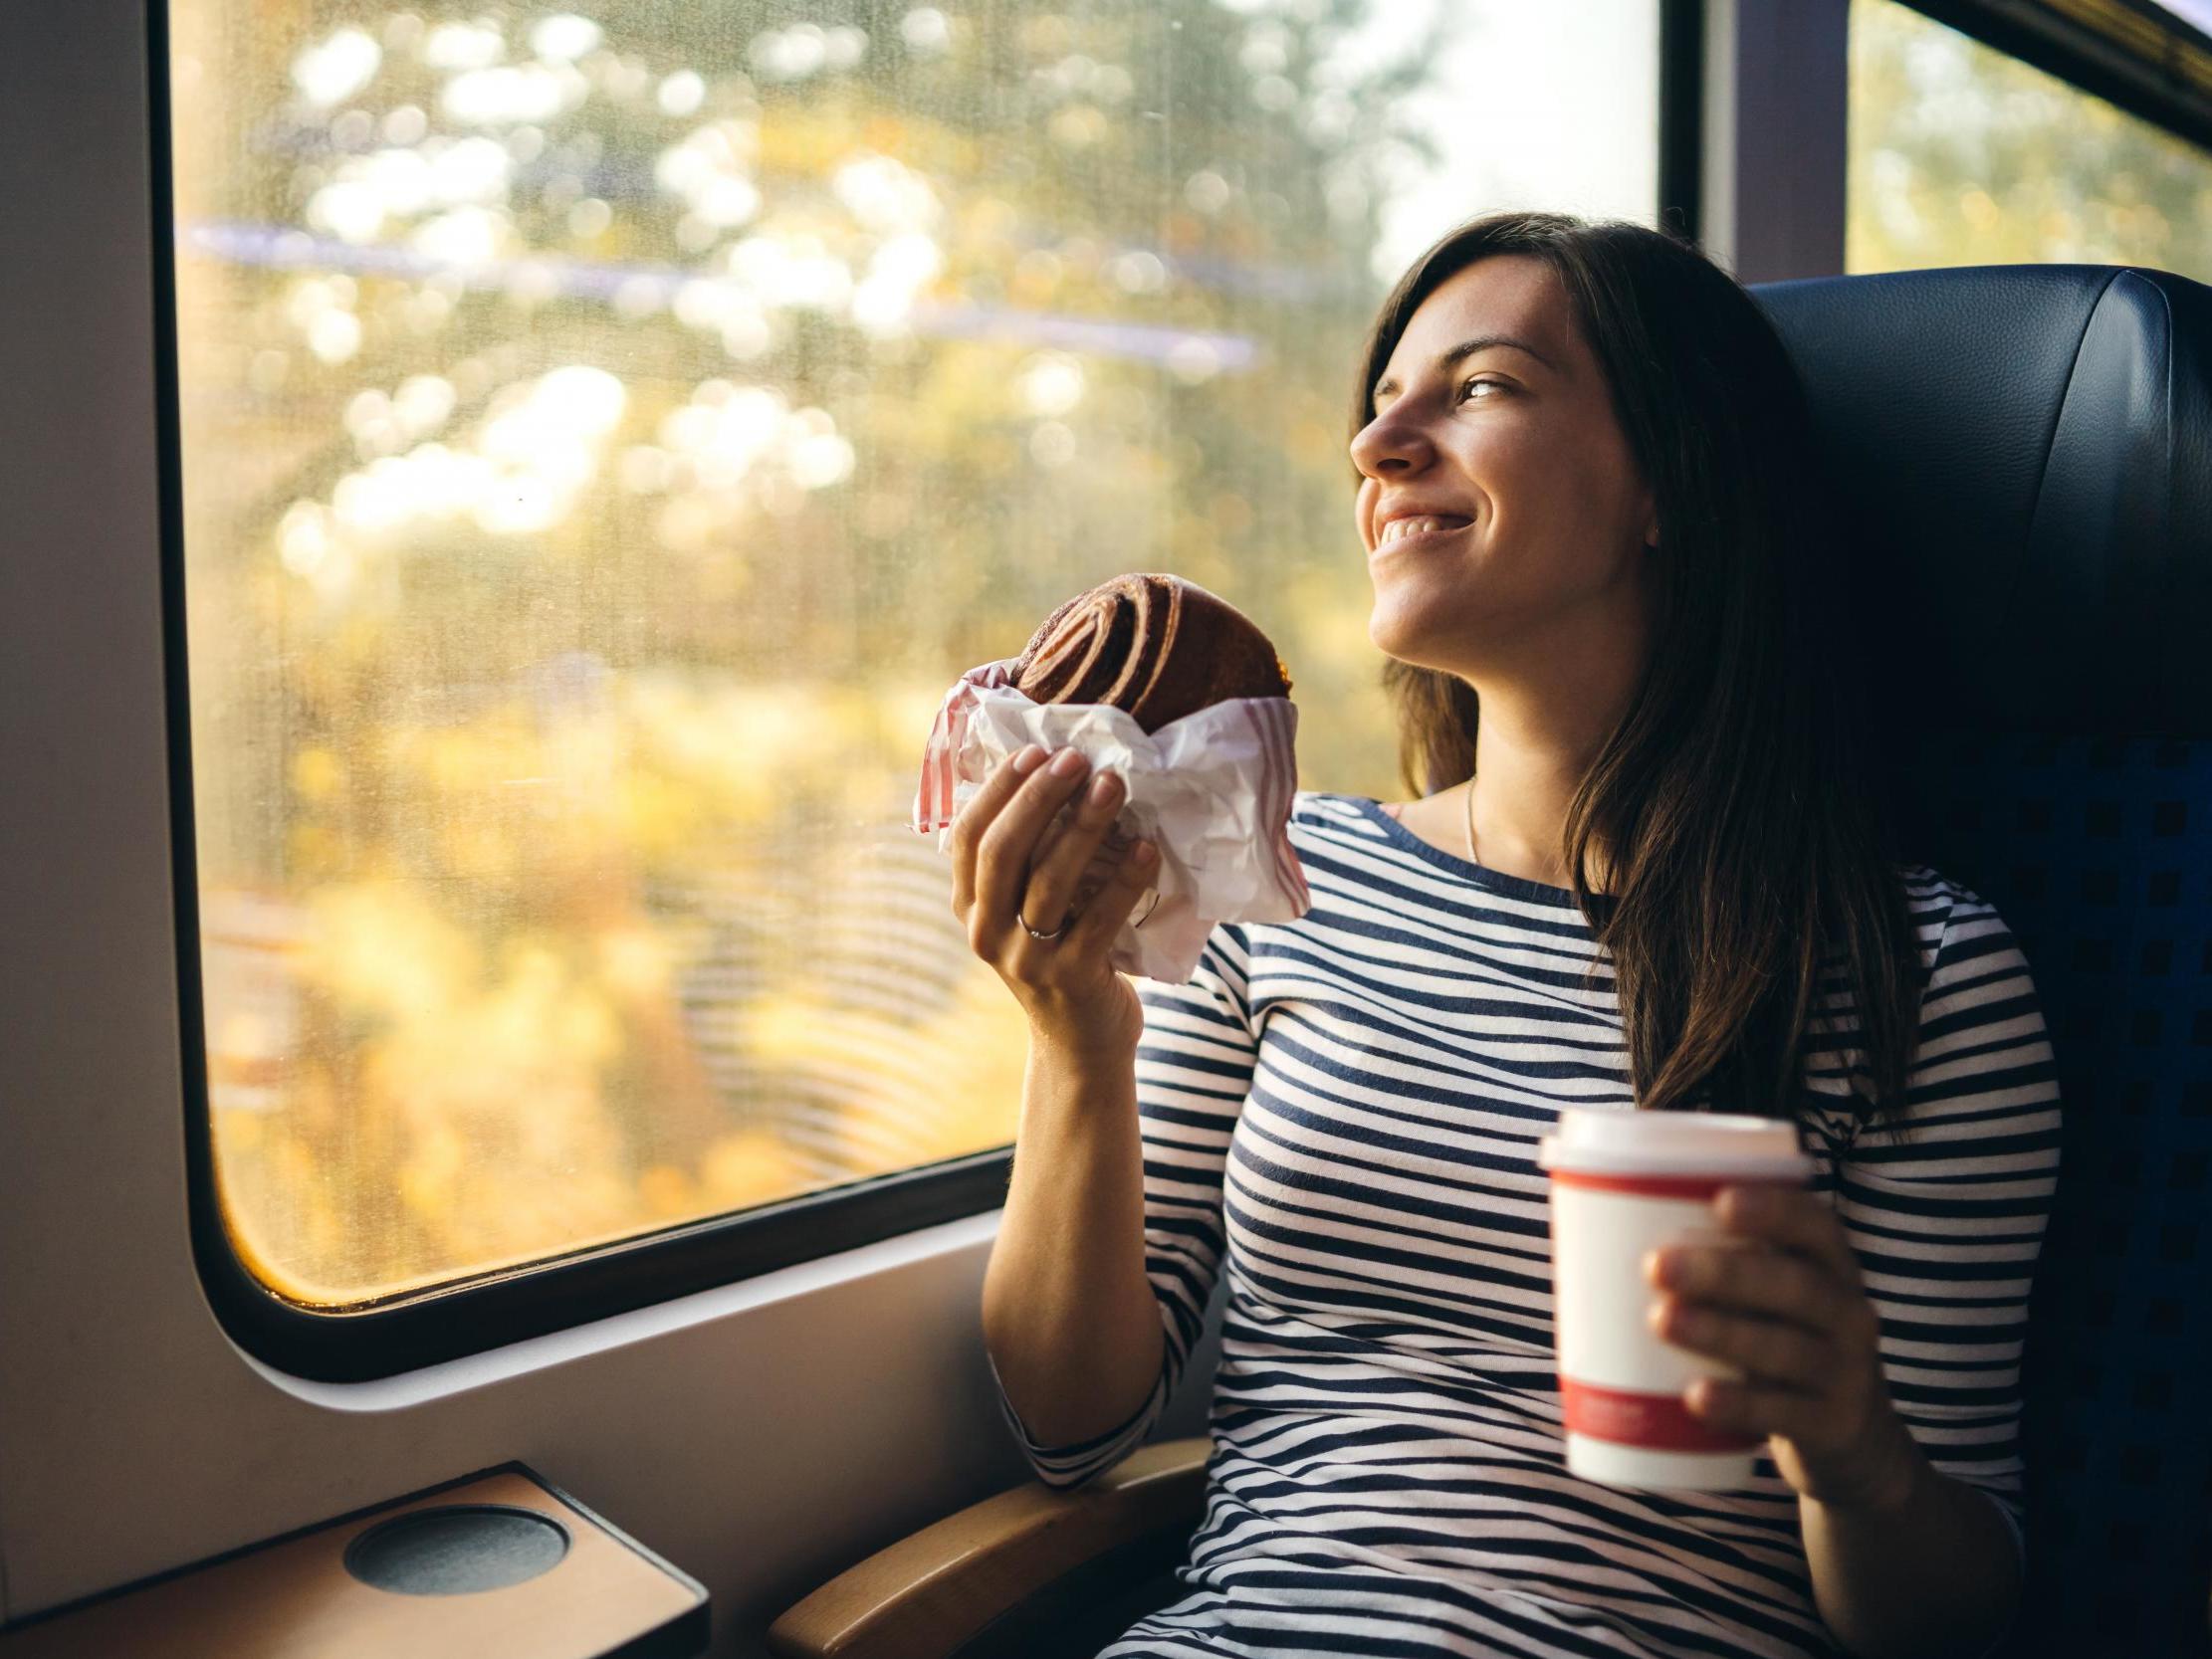 Eating and drinking on trains would be banned if the new advice was taken up